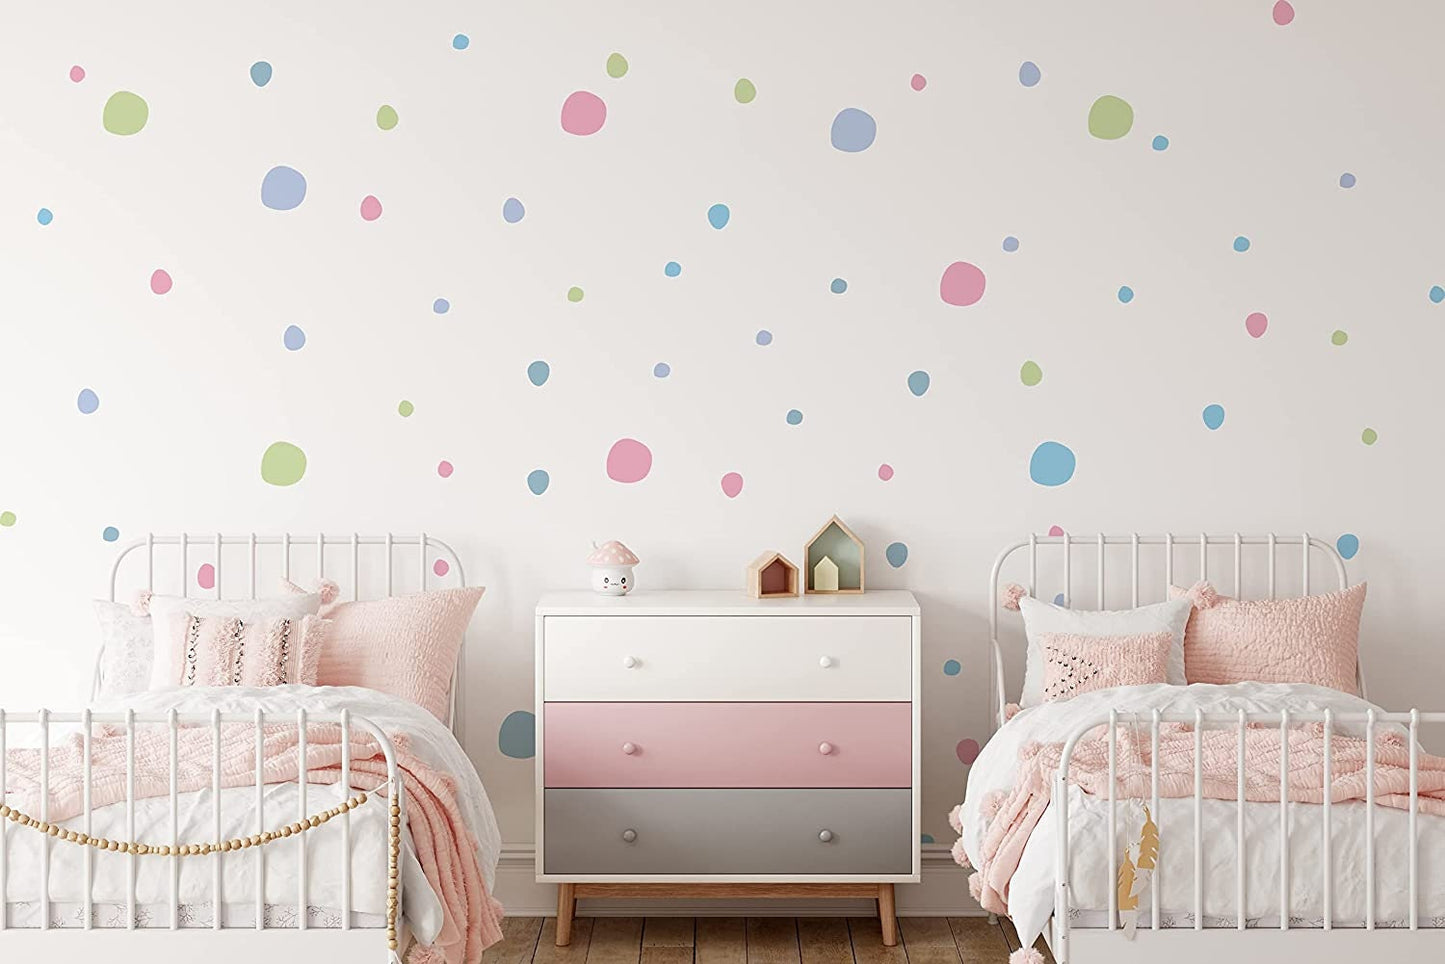 Pastel Colour Wall Stickers Polka Dots Spots Blobs Irregular Wall Decals For Nursery Rooms Childrens Bedroom Wall Decor